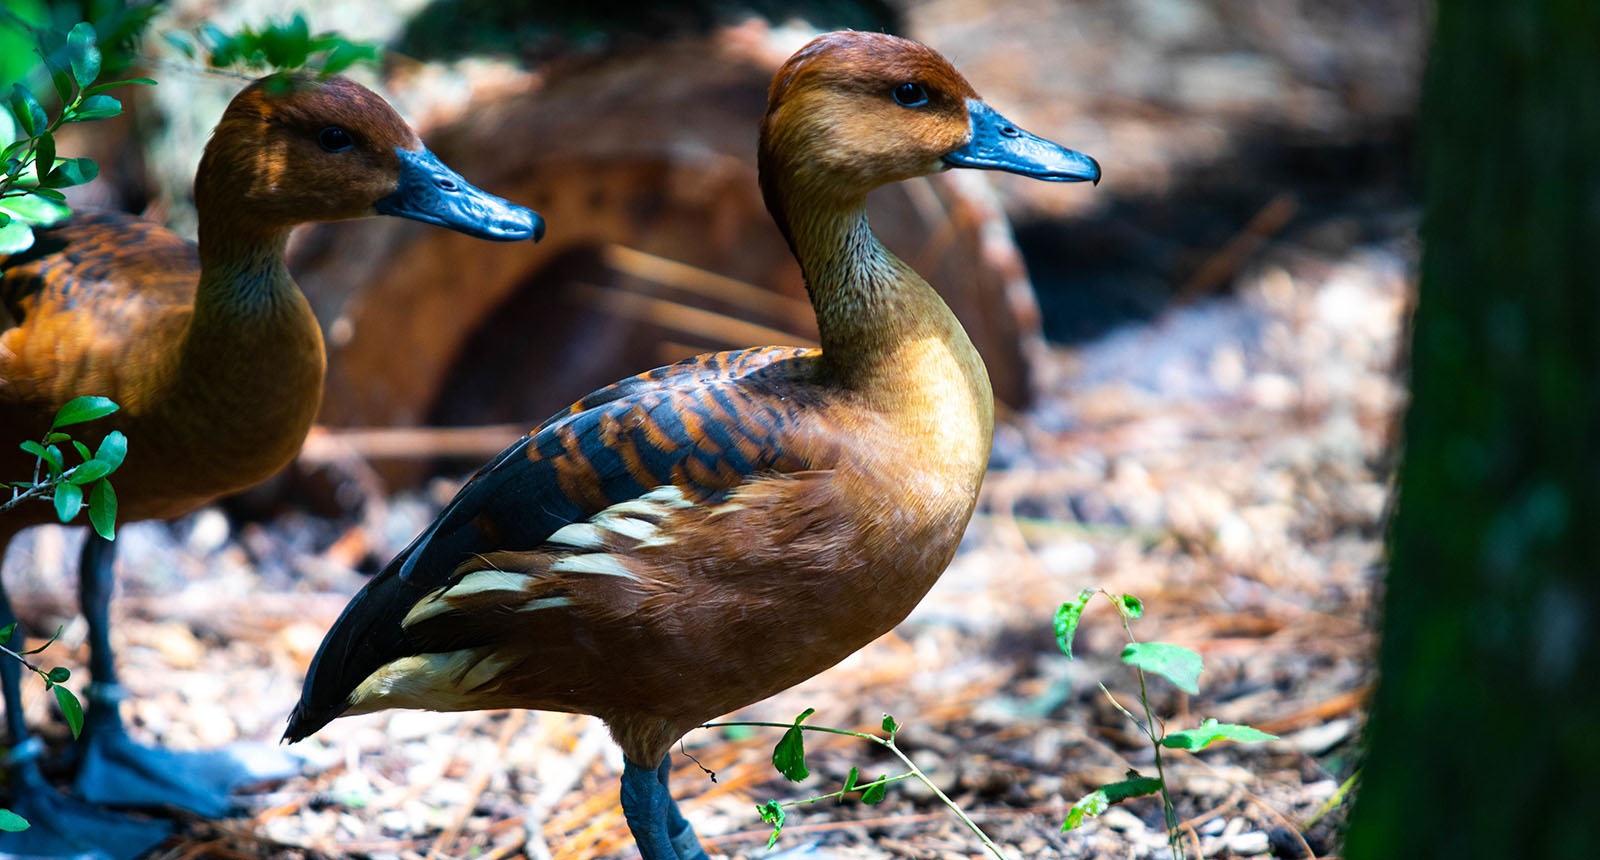 Fulvous whistling duck - Dendrocygna bicolor